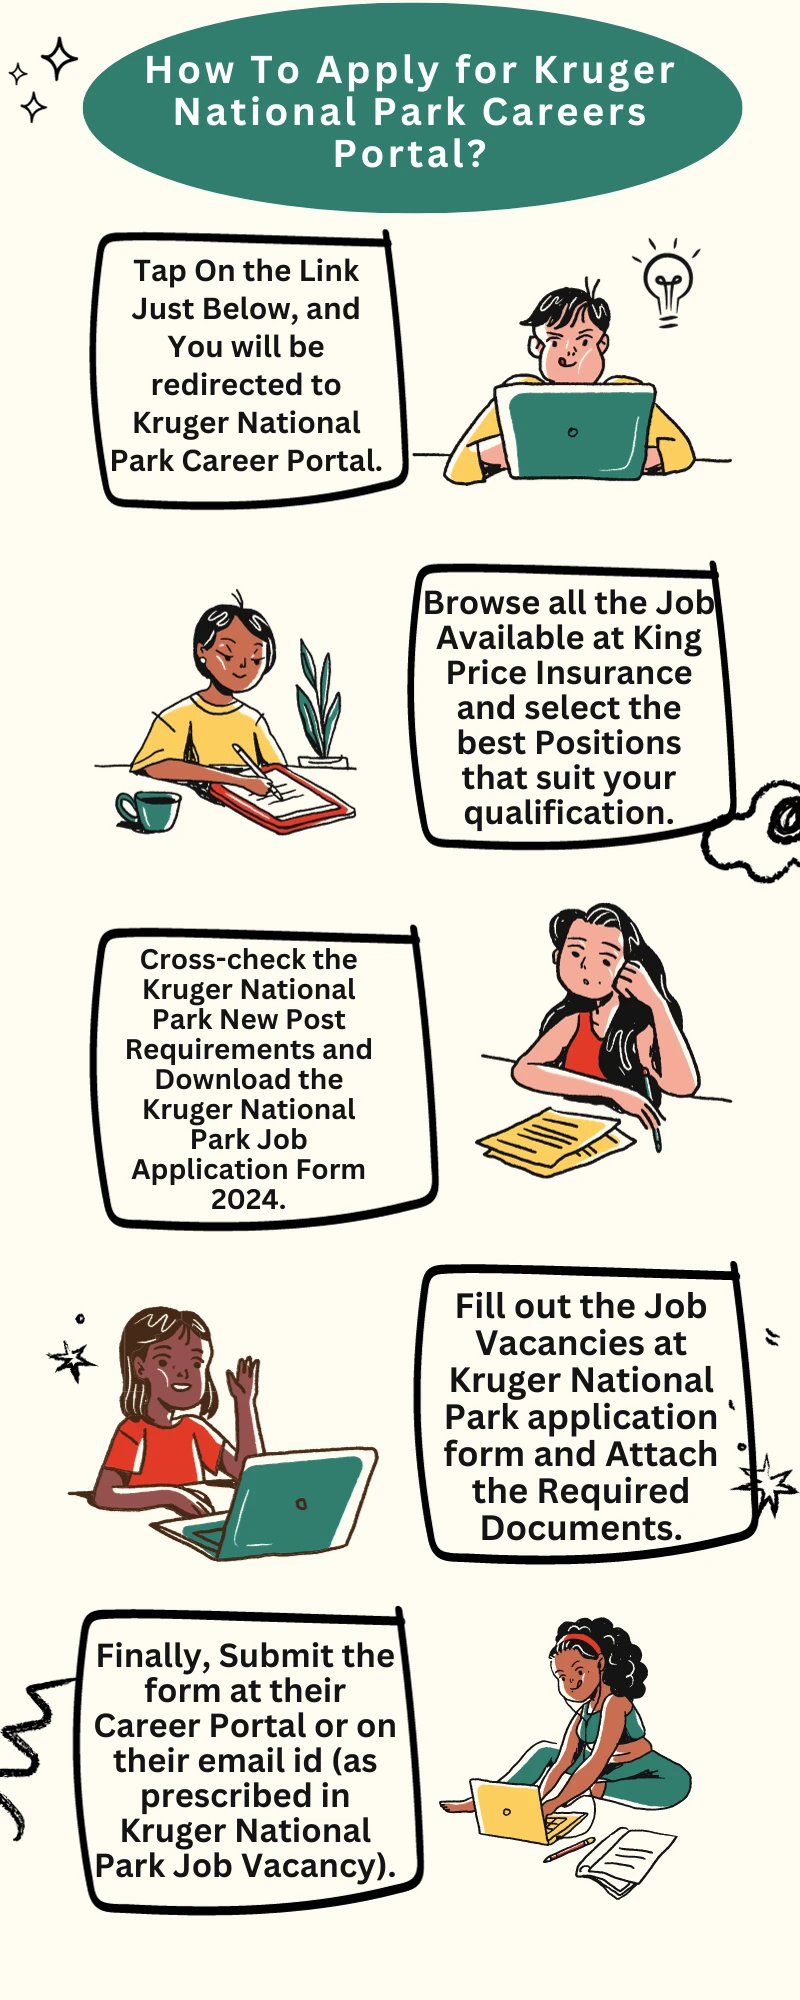 How To Apply for Kruger National Park Careers Portal?